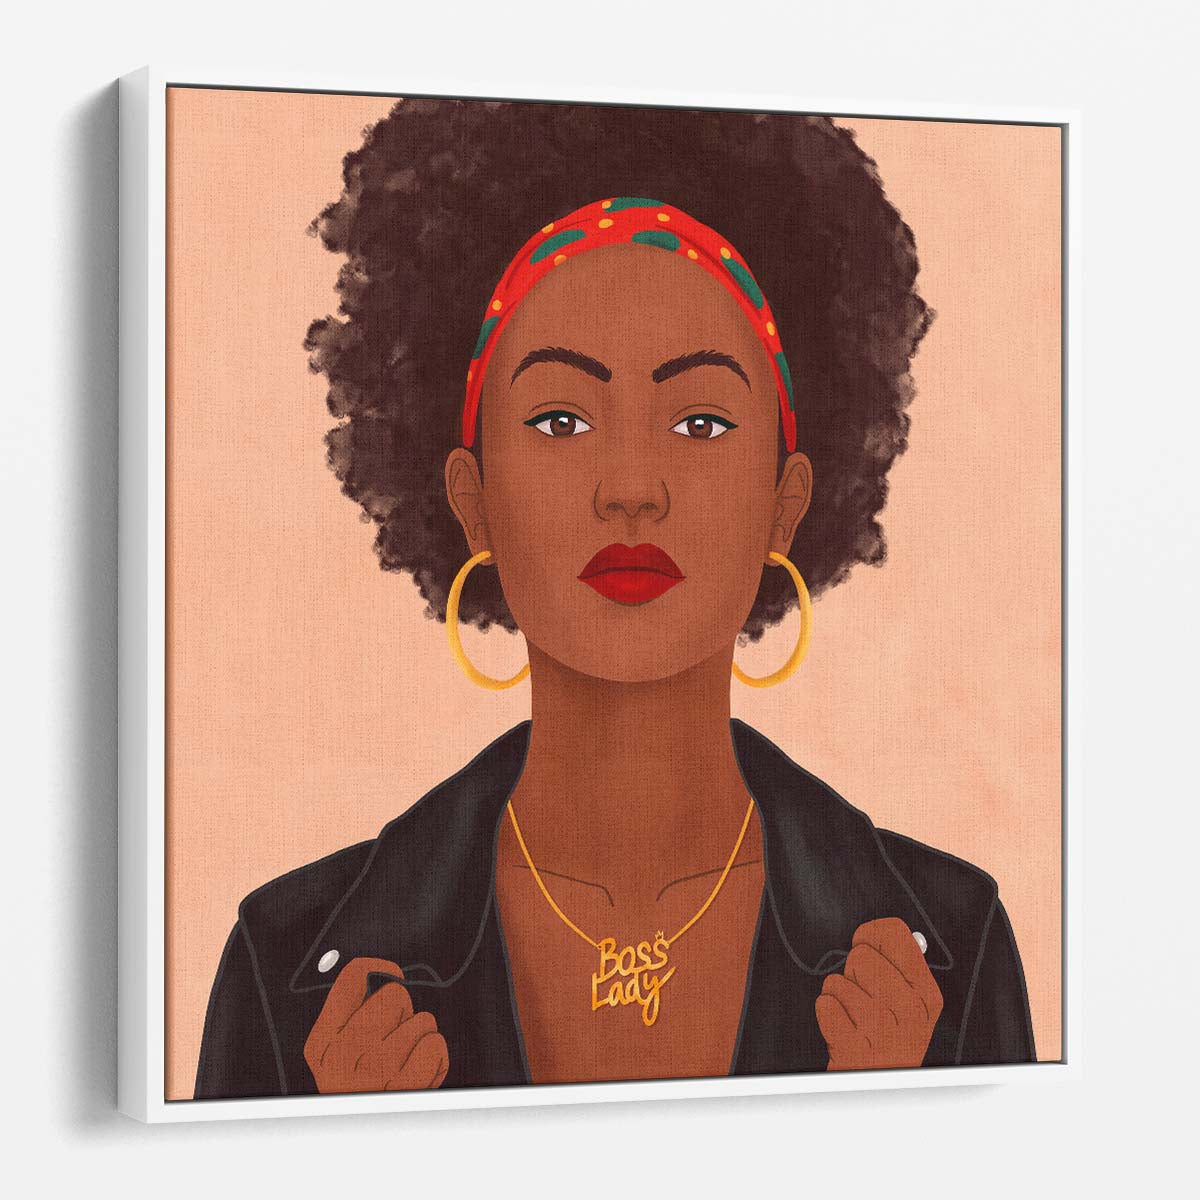 Empowering African Boss Lady Fashion Illustration Portrait Wall Art by Luxuriance Designs. Made in USA.